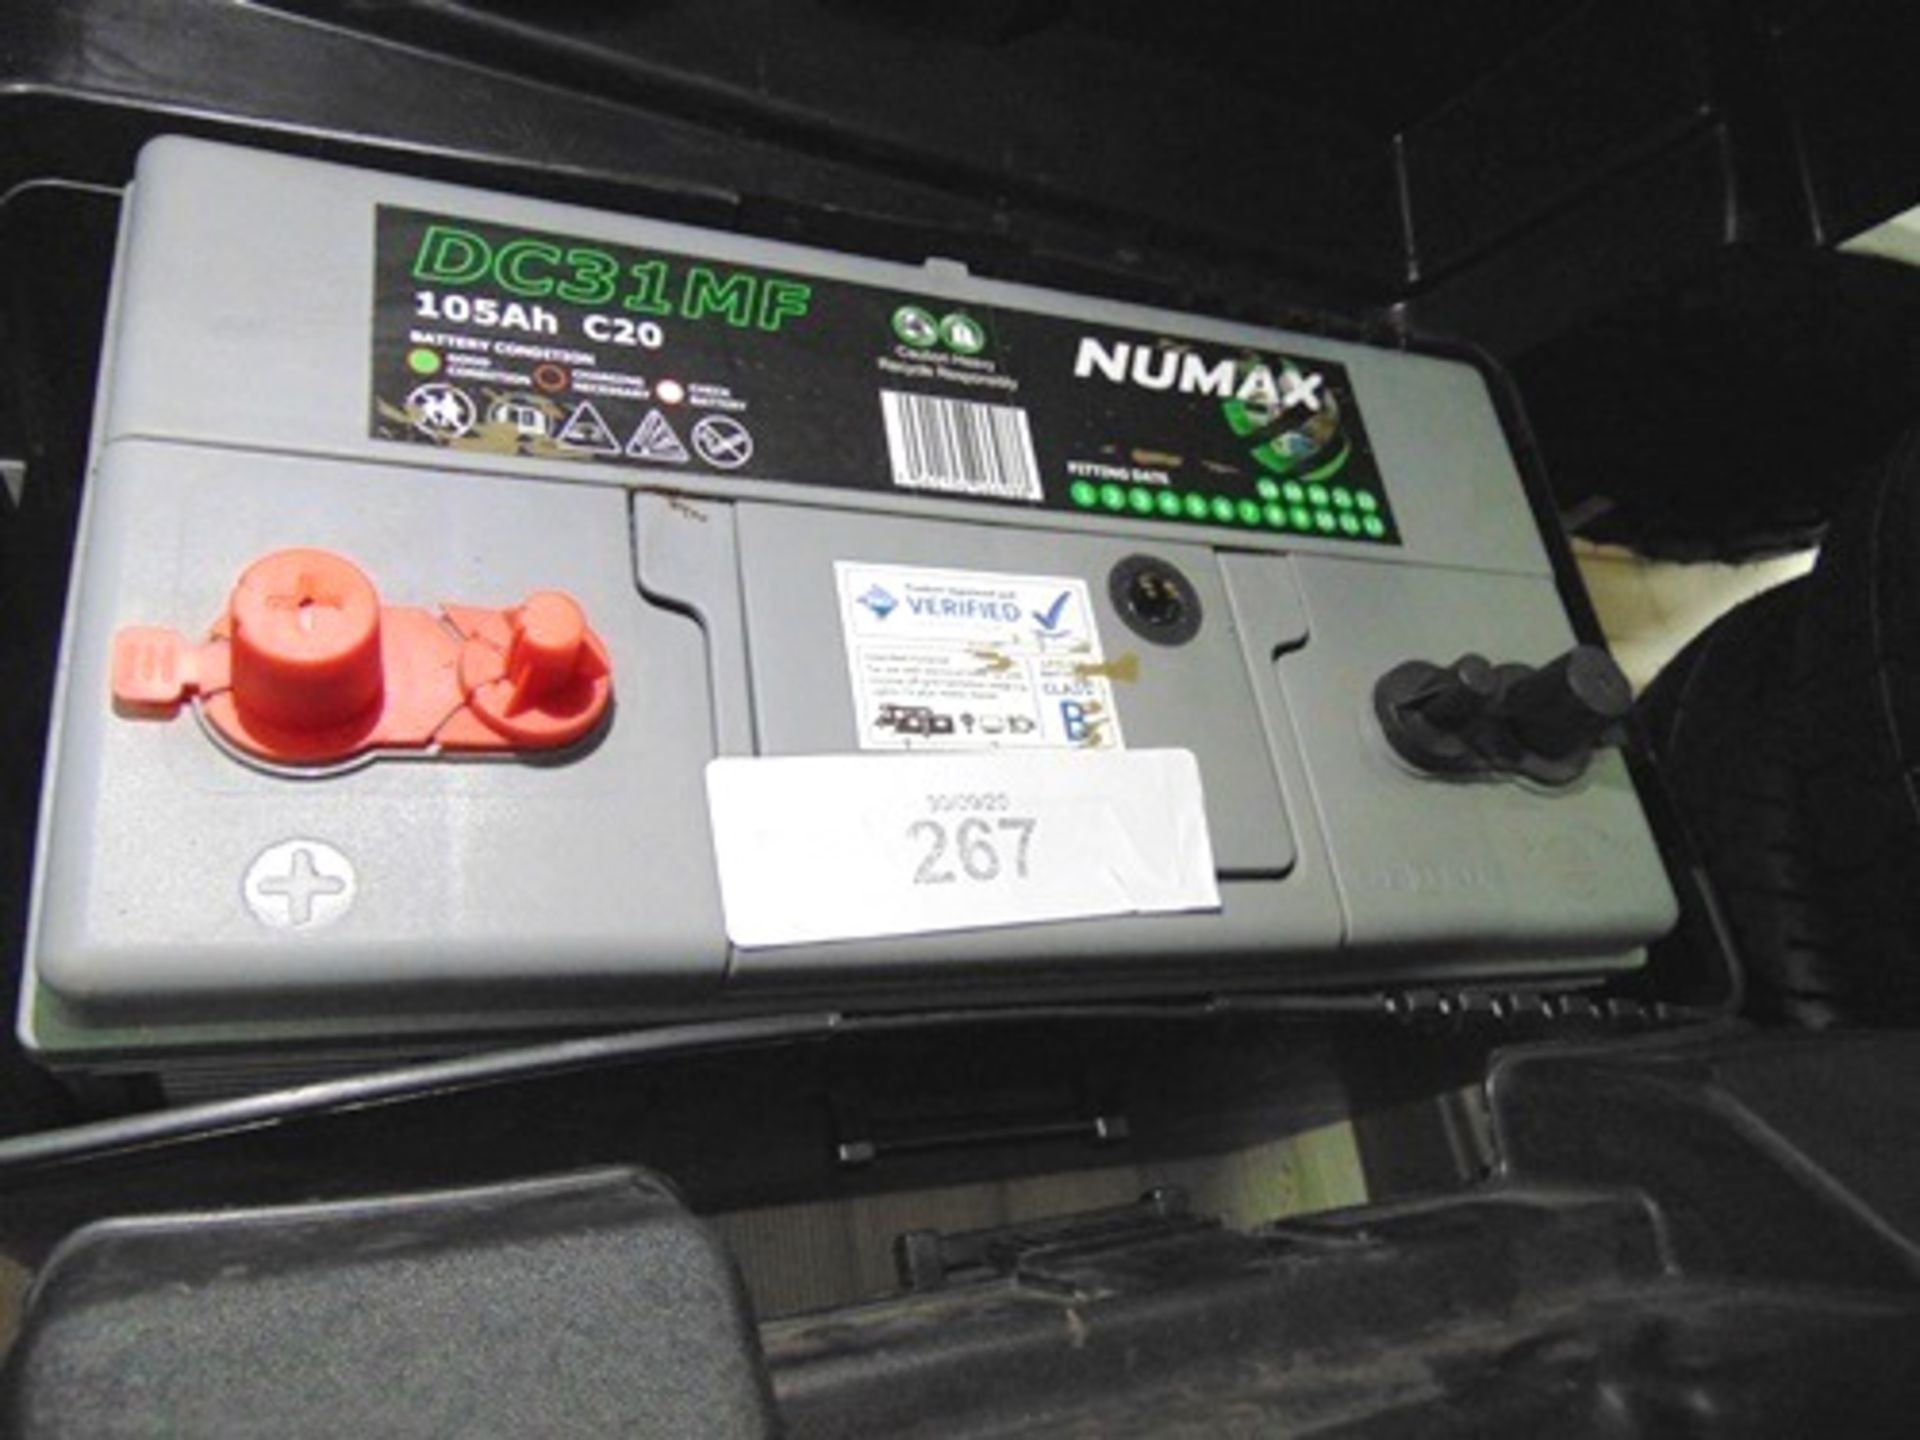 Numax DC31 MF 105ah C20 12V leisure battery in ABS battery box - New (GS7) - Image 2 of 2